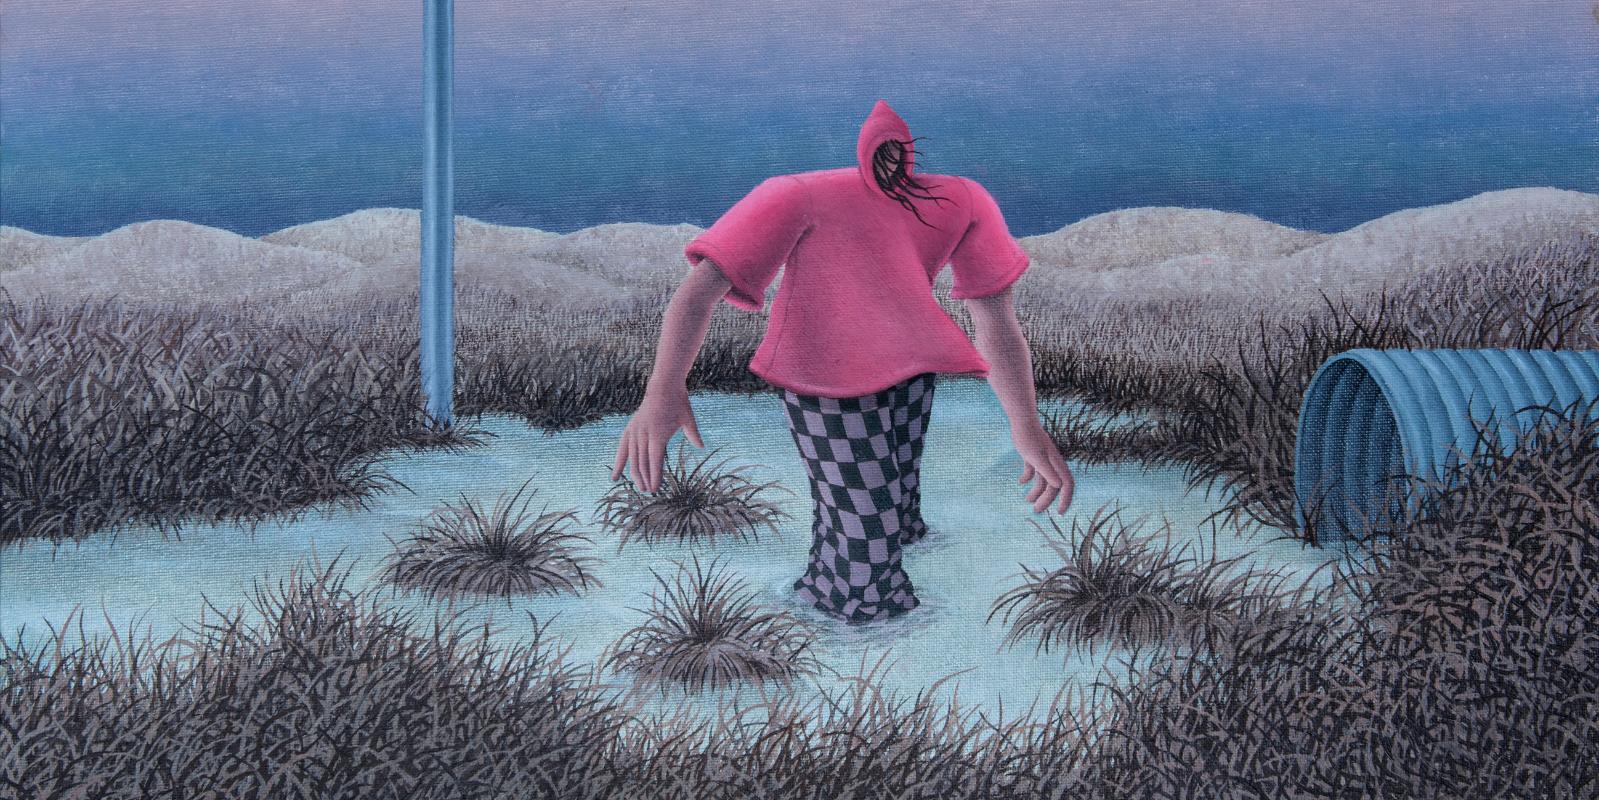 drawing of distorted figure in a swamp with a pink hoodie and check trousers.